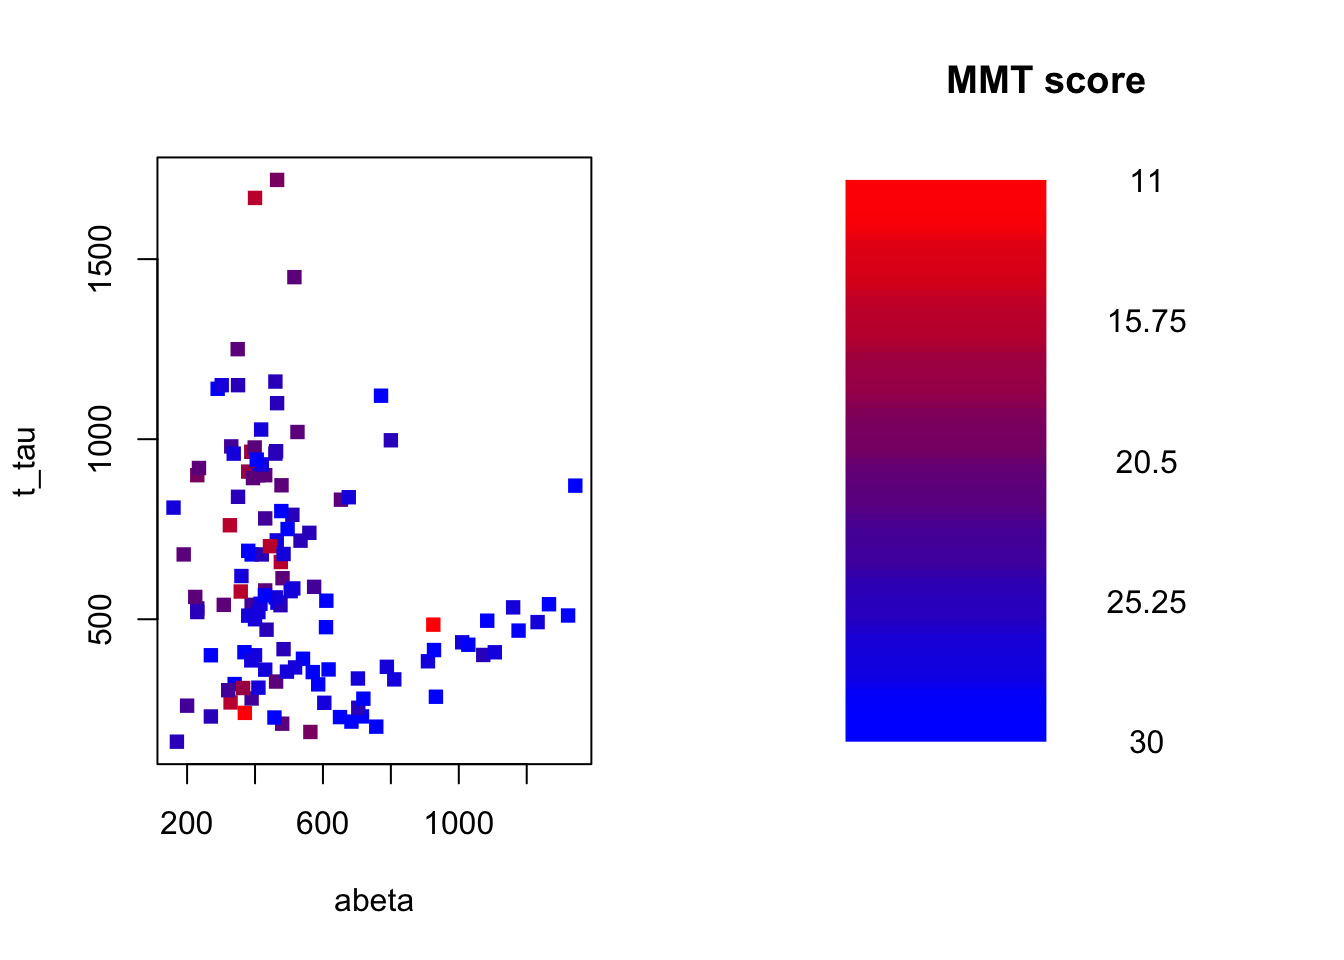 The example of two variables measured on a number of samples. The MMT score is shown as a gradient from red (lowest score) to blue (highest score)